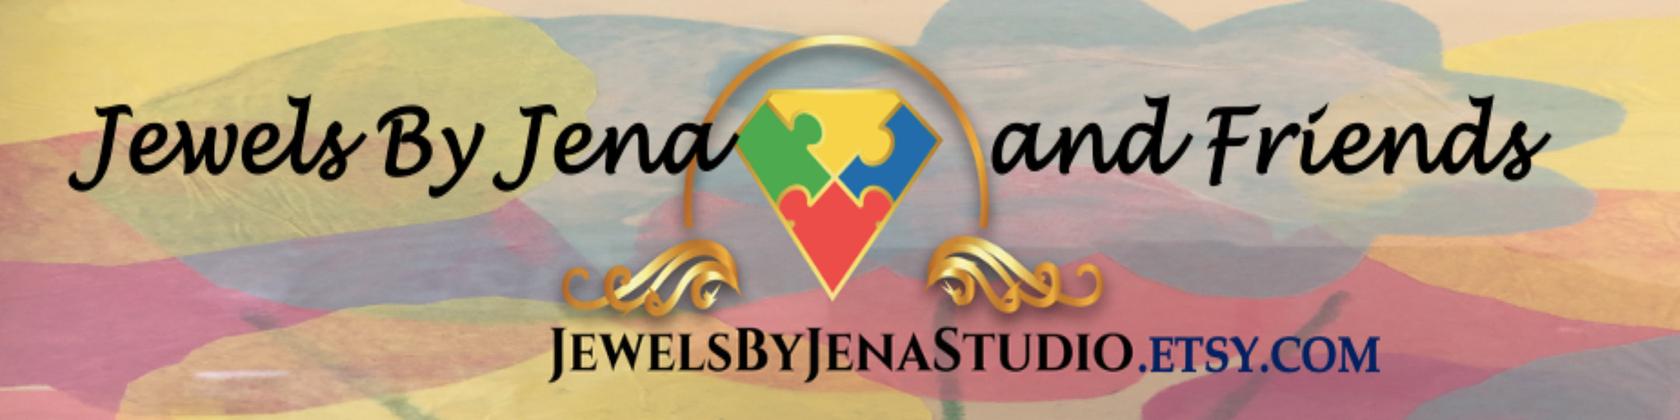 jewels by jena etsy banner